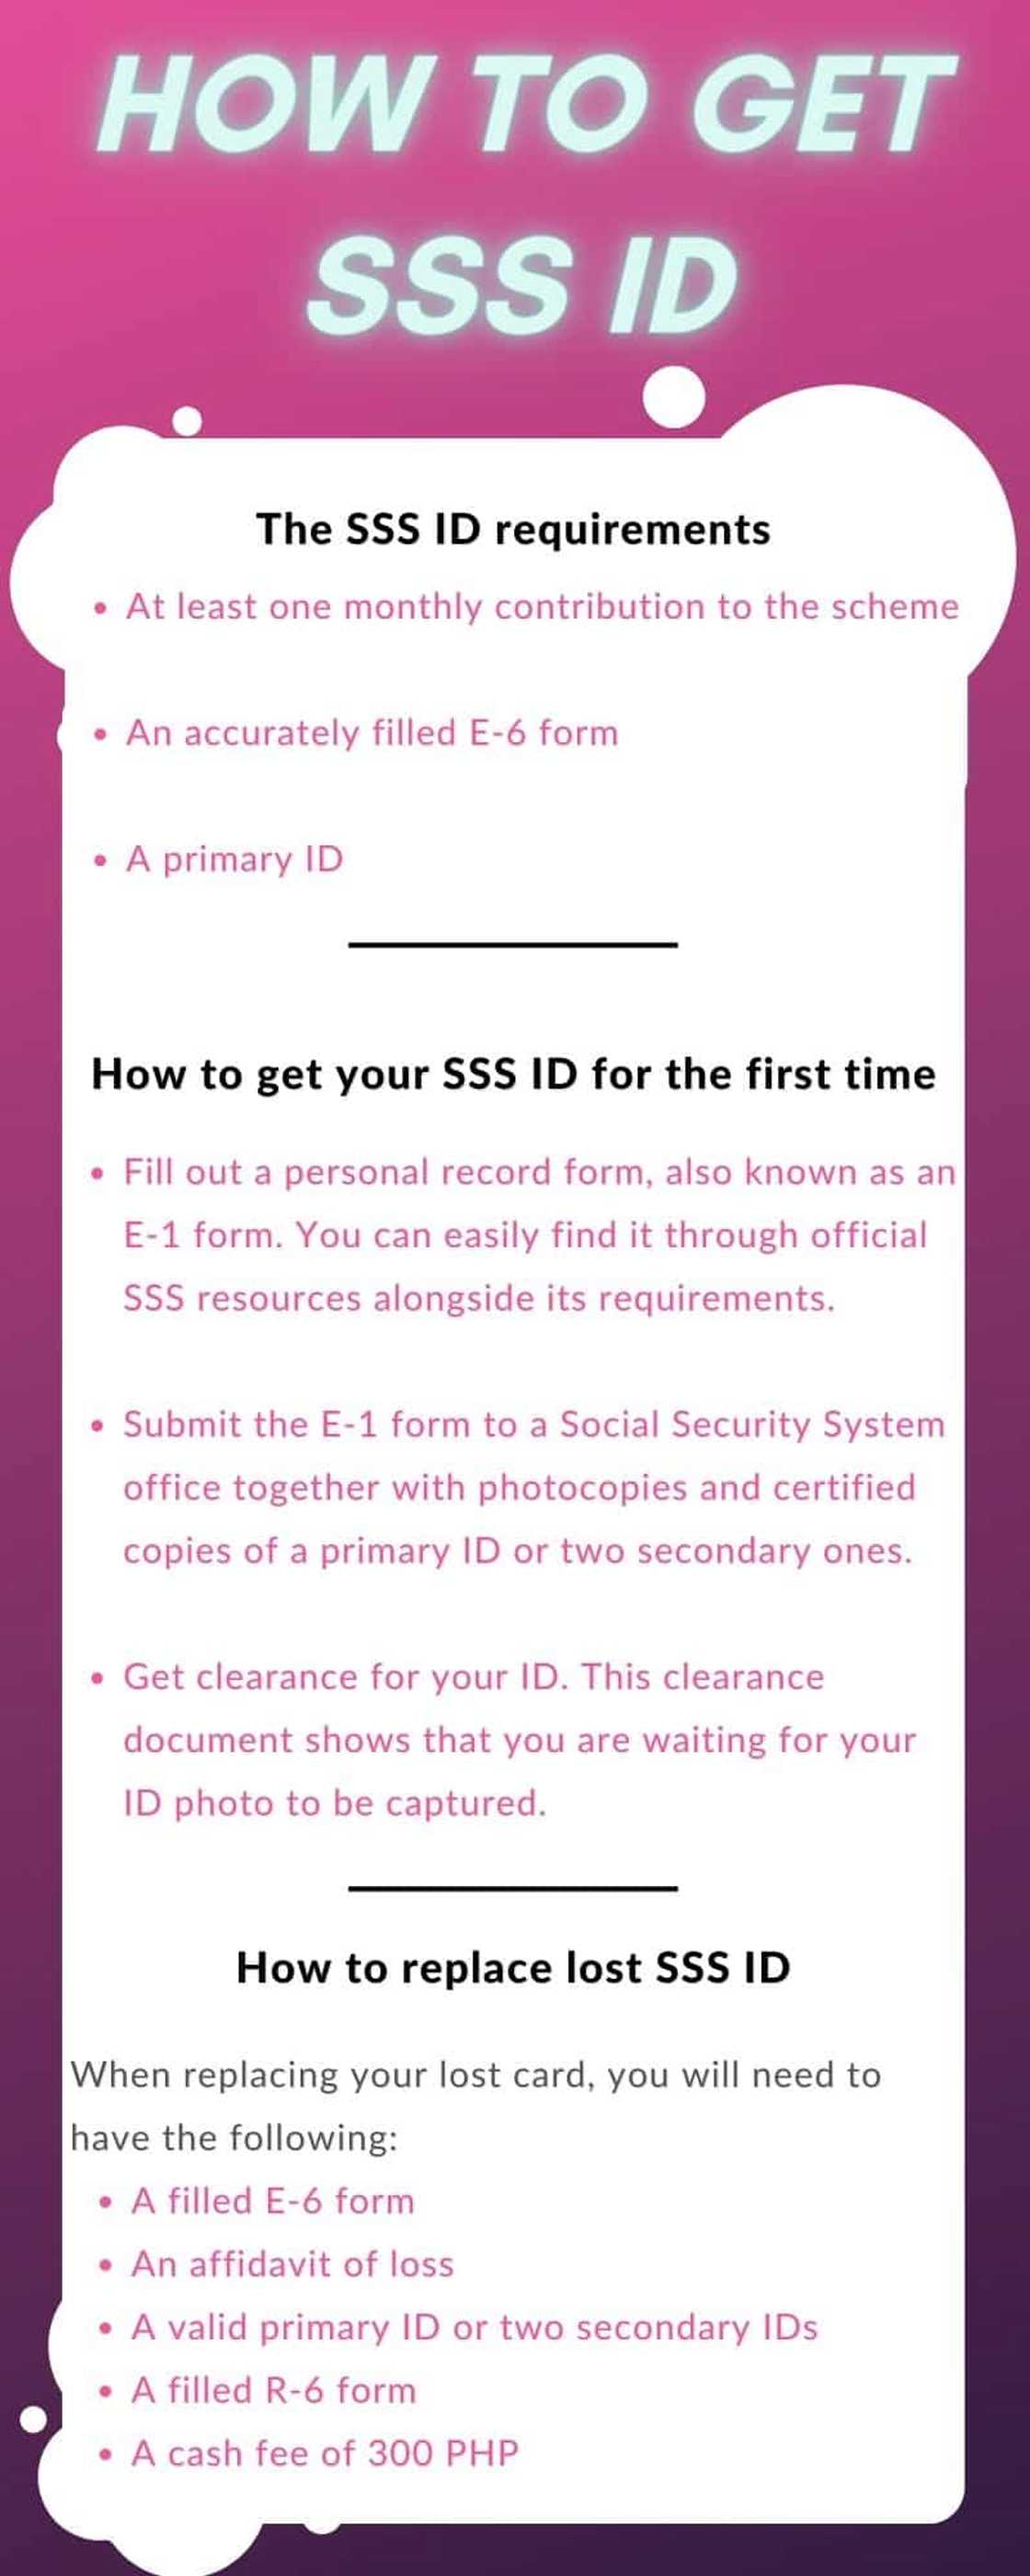 How to get SSS ID